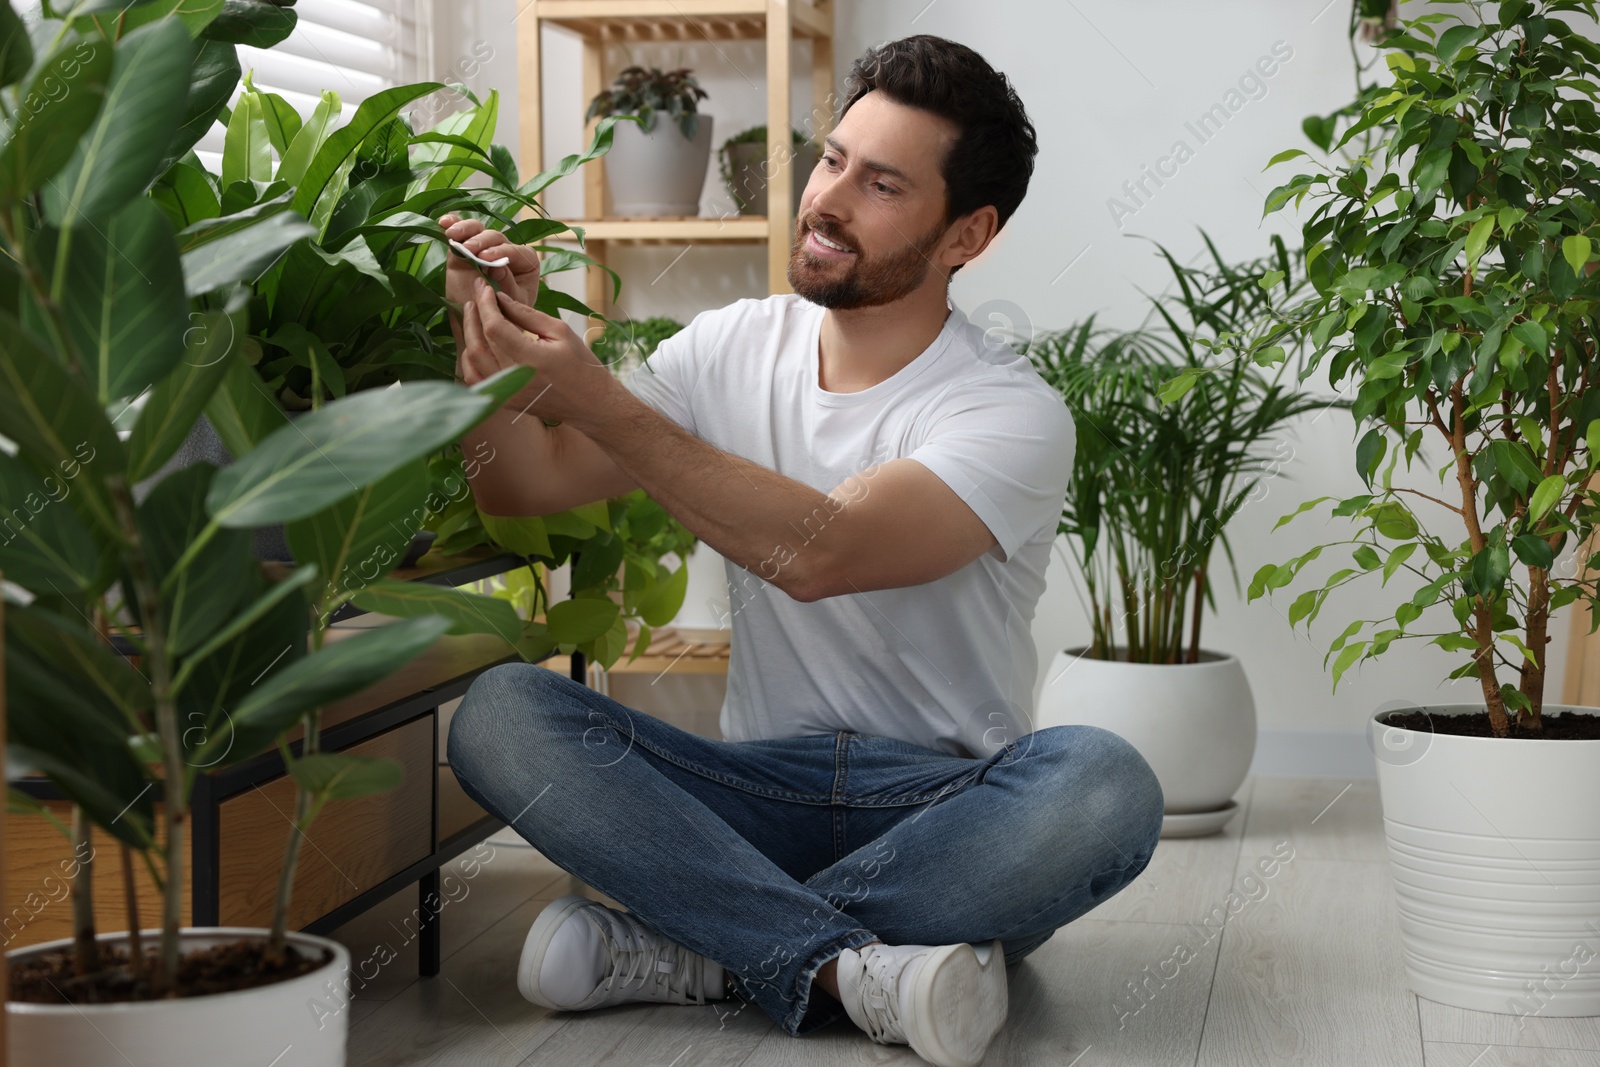 Photo of Man wiping leaves of beautiful potted houseplants indoors